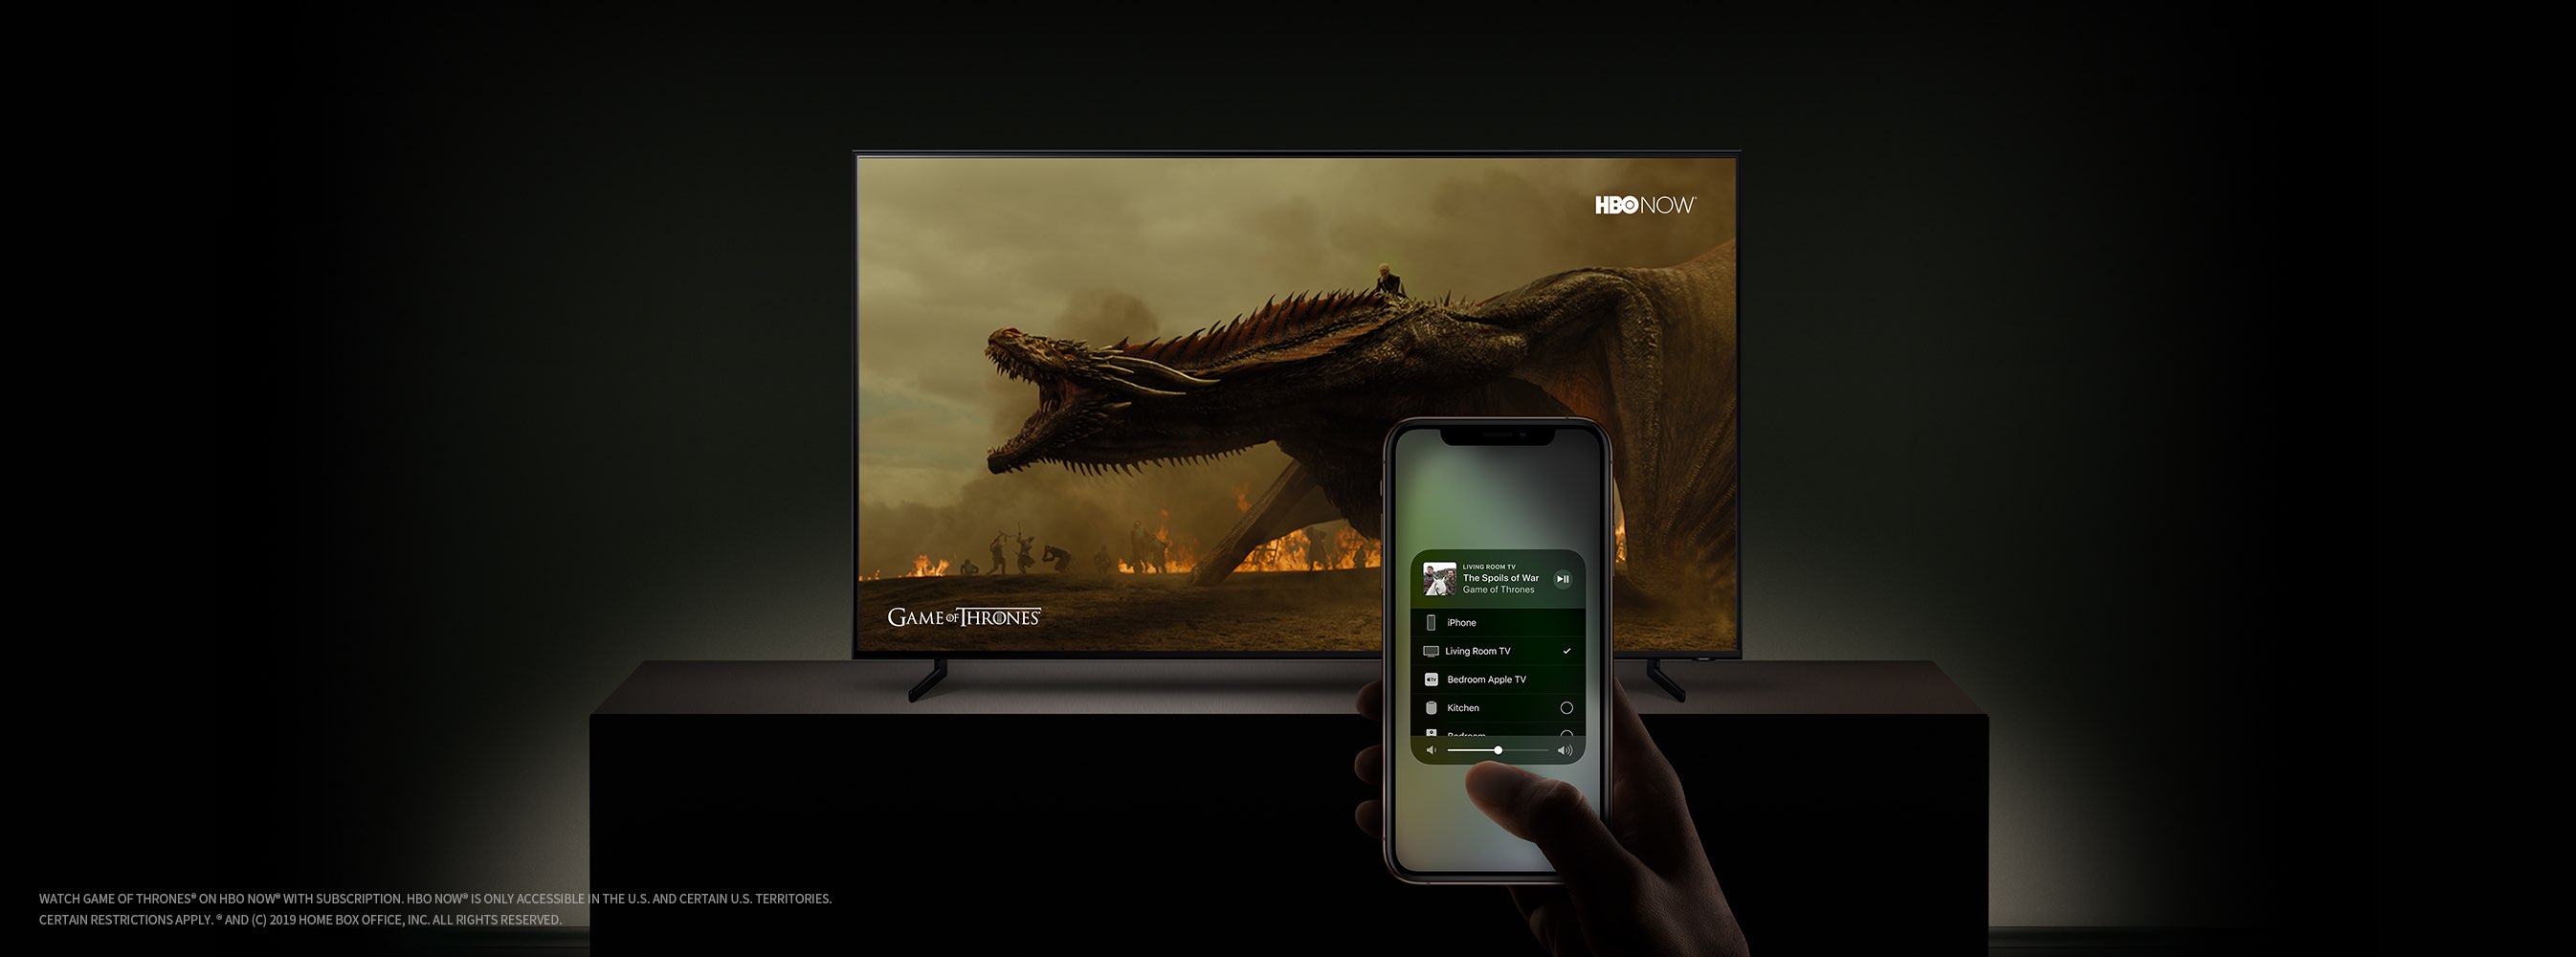 Mentor Playa Minero AirPlay 2 & the iTunes Movies and TV Shows app are coming to Samsung Smart  TVs